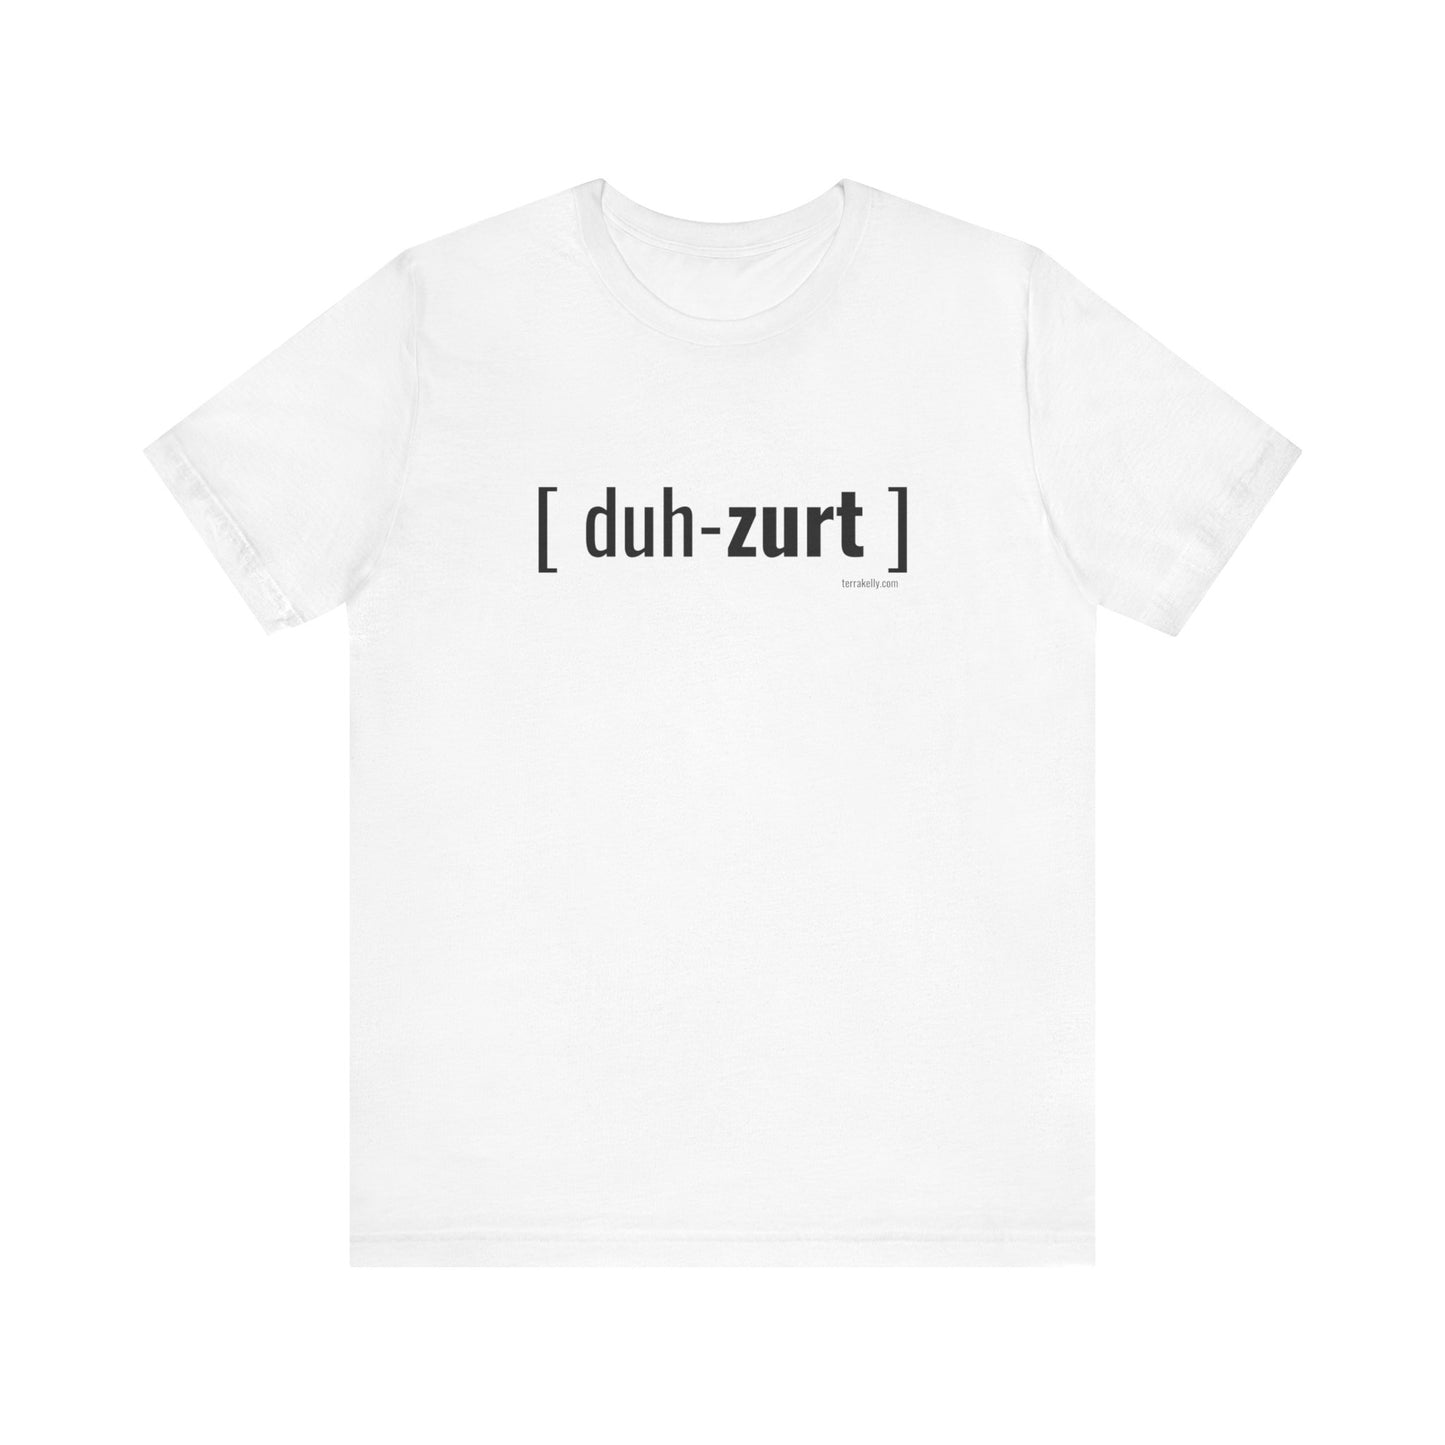 Dessert [duh-zurt] Unisex Jersey Short Sleeve T-shirt | Available in Five Colors & Six Sizes | FREE SHIPPING